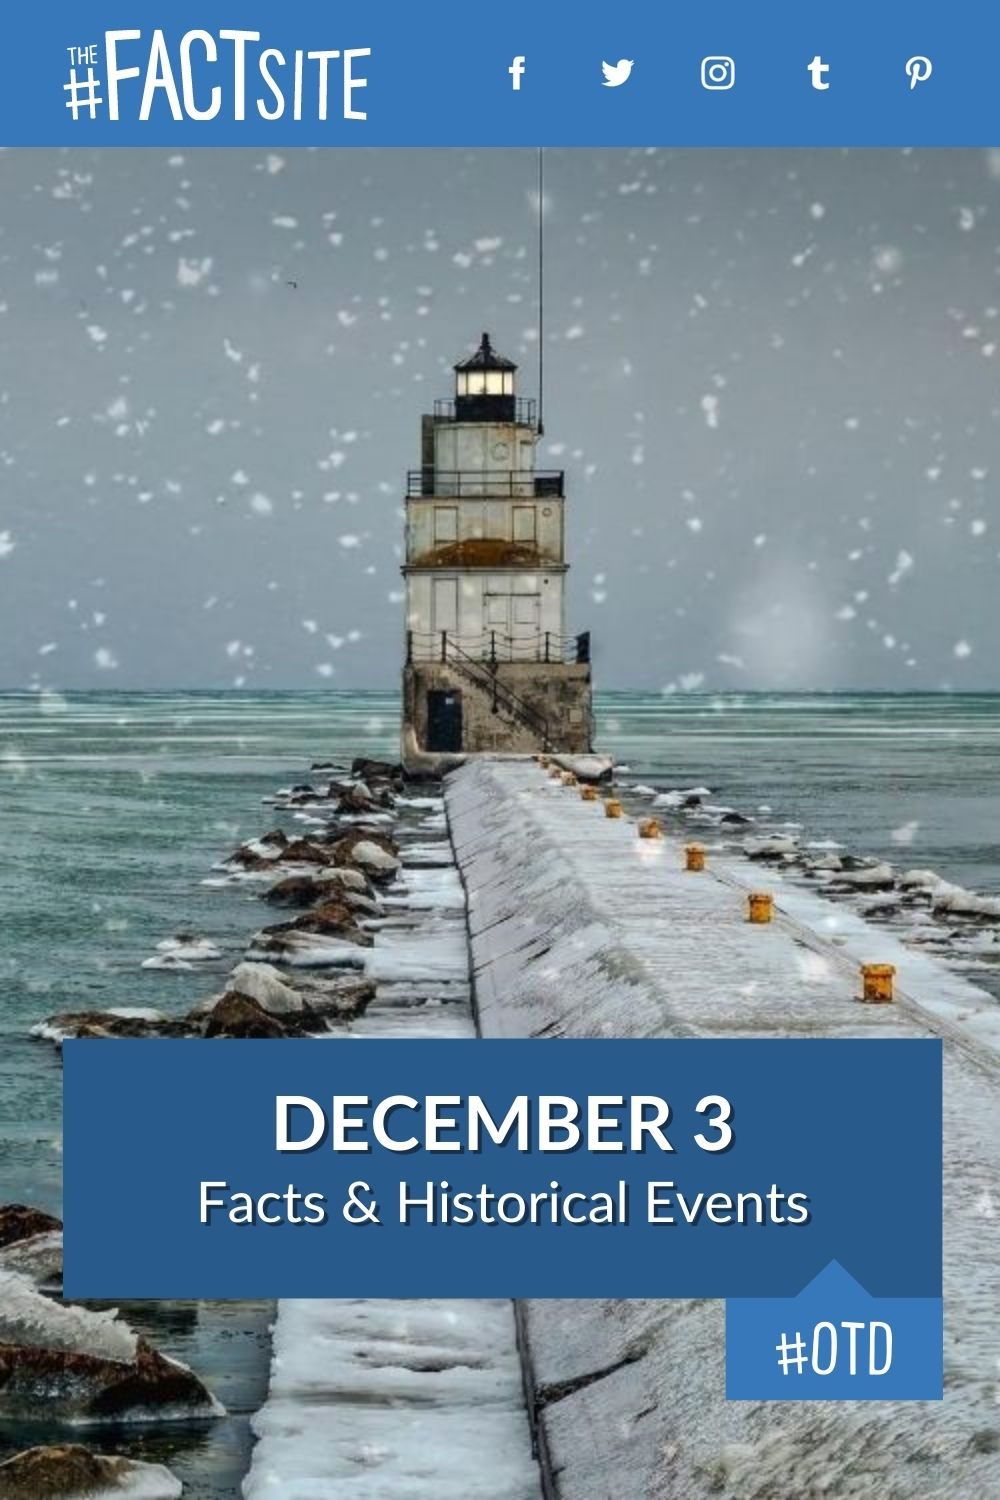 Facts & Historic Events That Happened on December 3